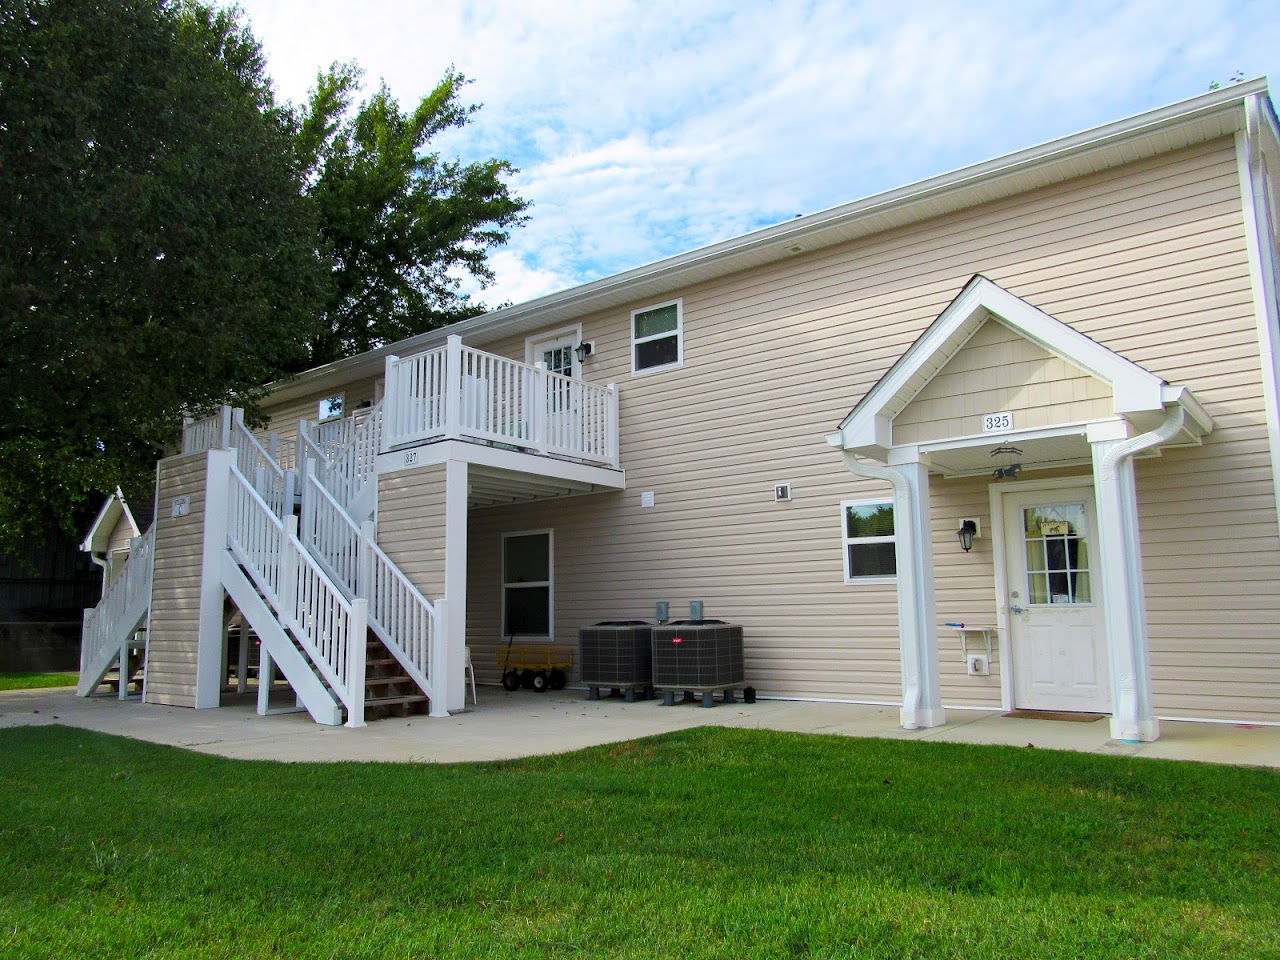 Photo of JACOB'S CROSSING. Affordable housing located at 909 W COLLEGE ST RIO GRANDE, OH 45674